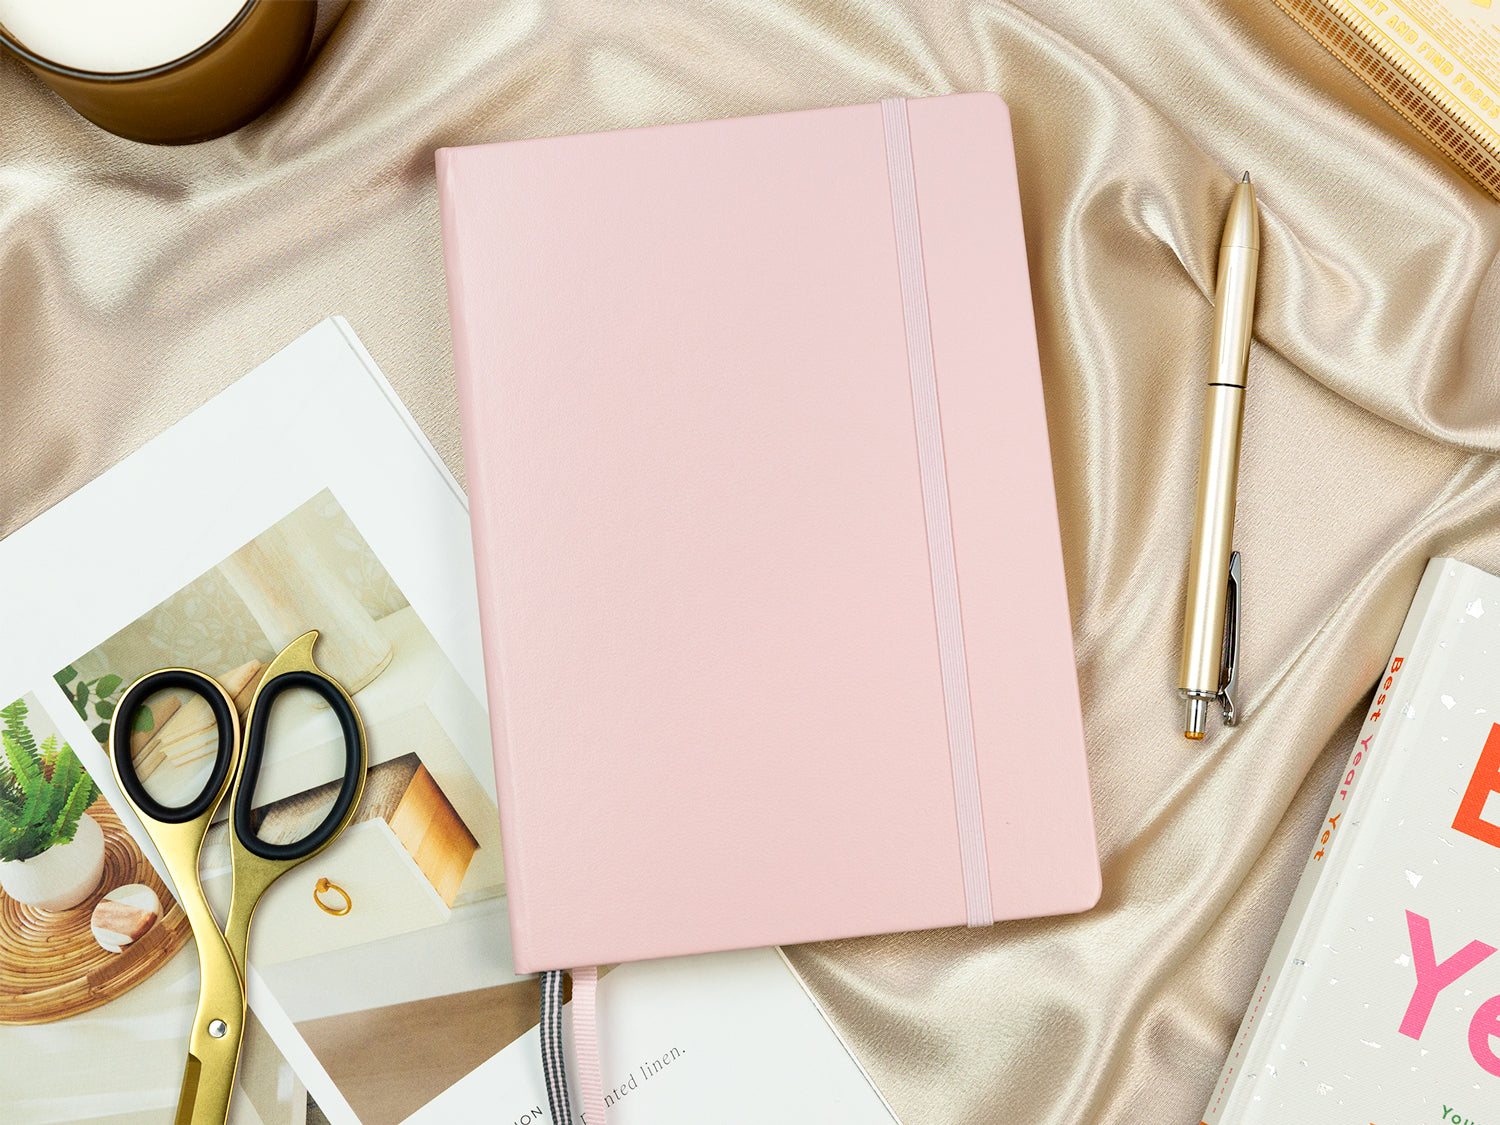 A pink planner on top of a gold sheet next to gold desk accessories